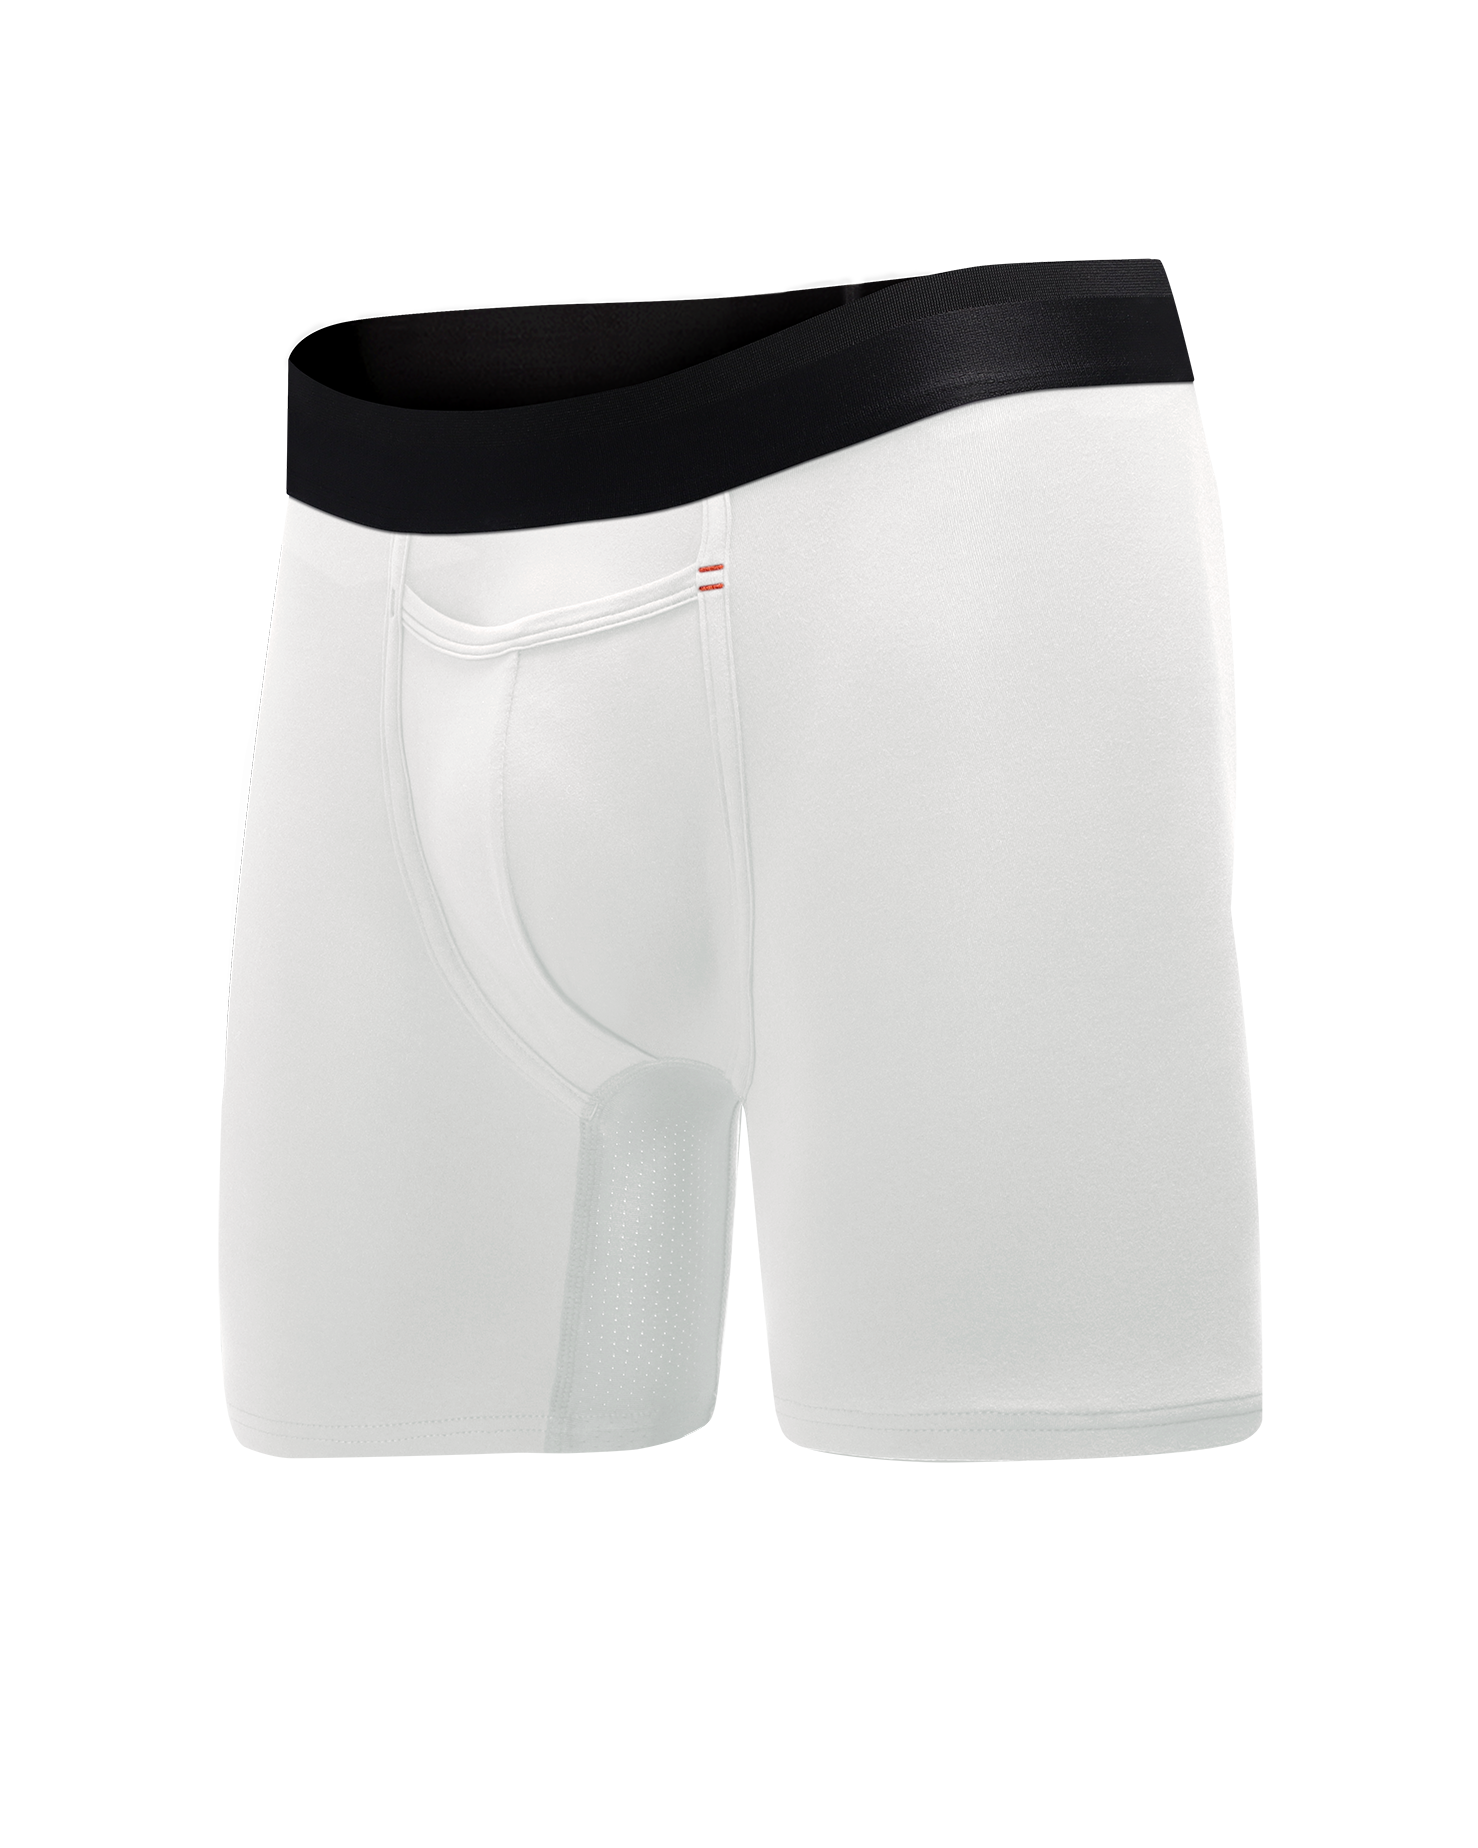 Classic Performance Boxer Brief Underwear -Athletic Fit | All Citizens